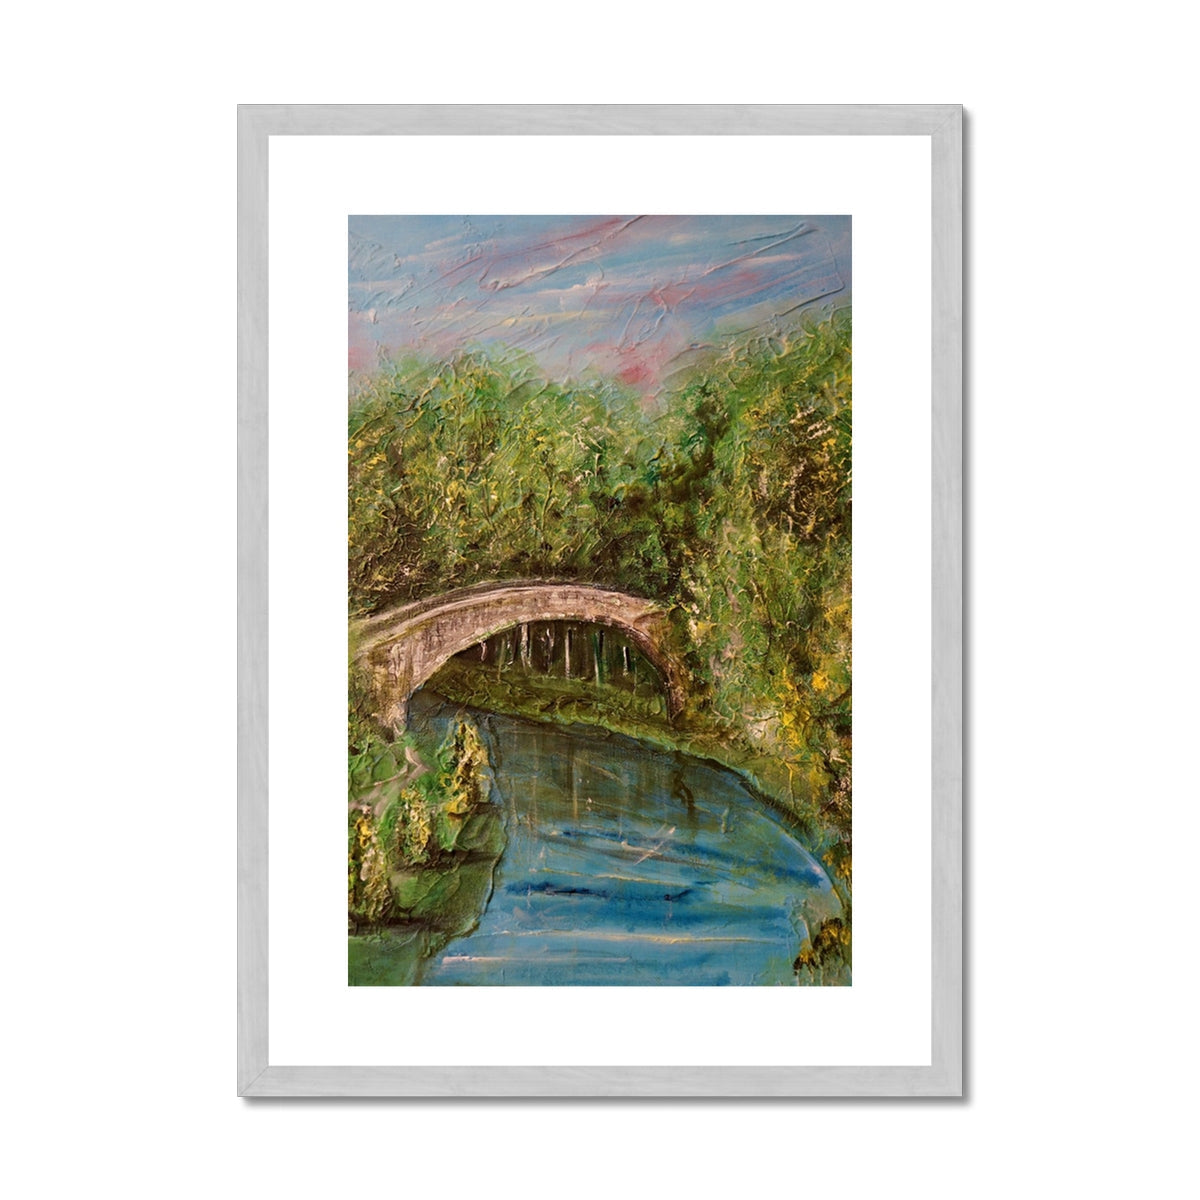 The Brig O Doon Painting | Antique Framed & Mounted Prints From Scotland-Antique Framed & Mounted Prints-Historic & Iconic Scotland Art Gallery-A2 Portrait-Silver Frame-Paintings, Prints, Homeware, Art Gifts From Scotland By Scottish Artist Kevin Hunter